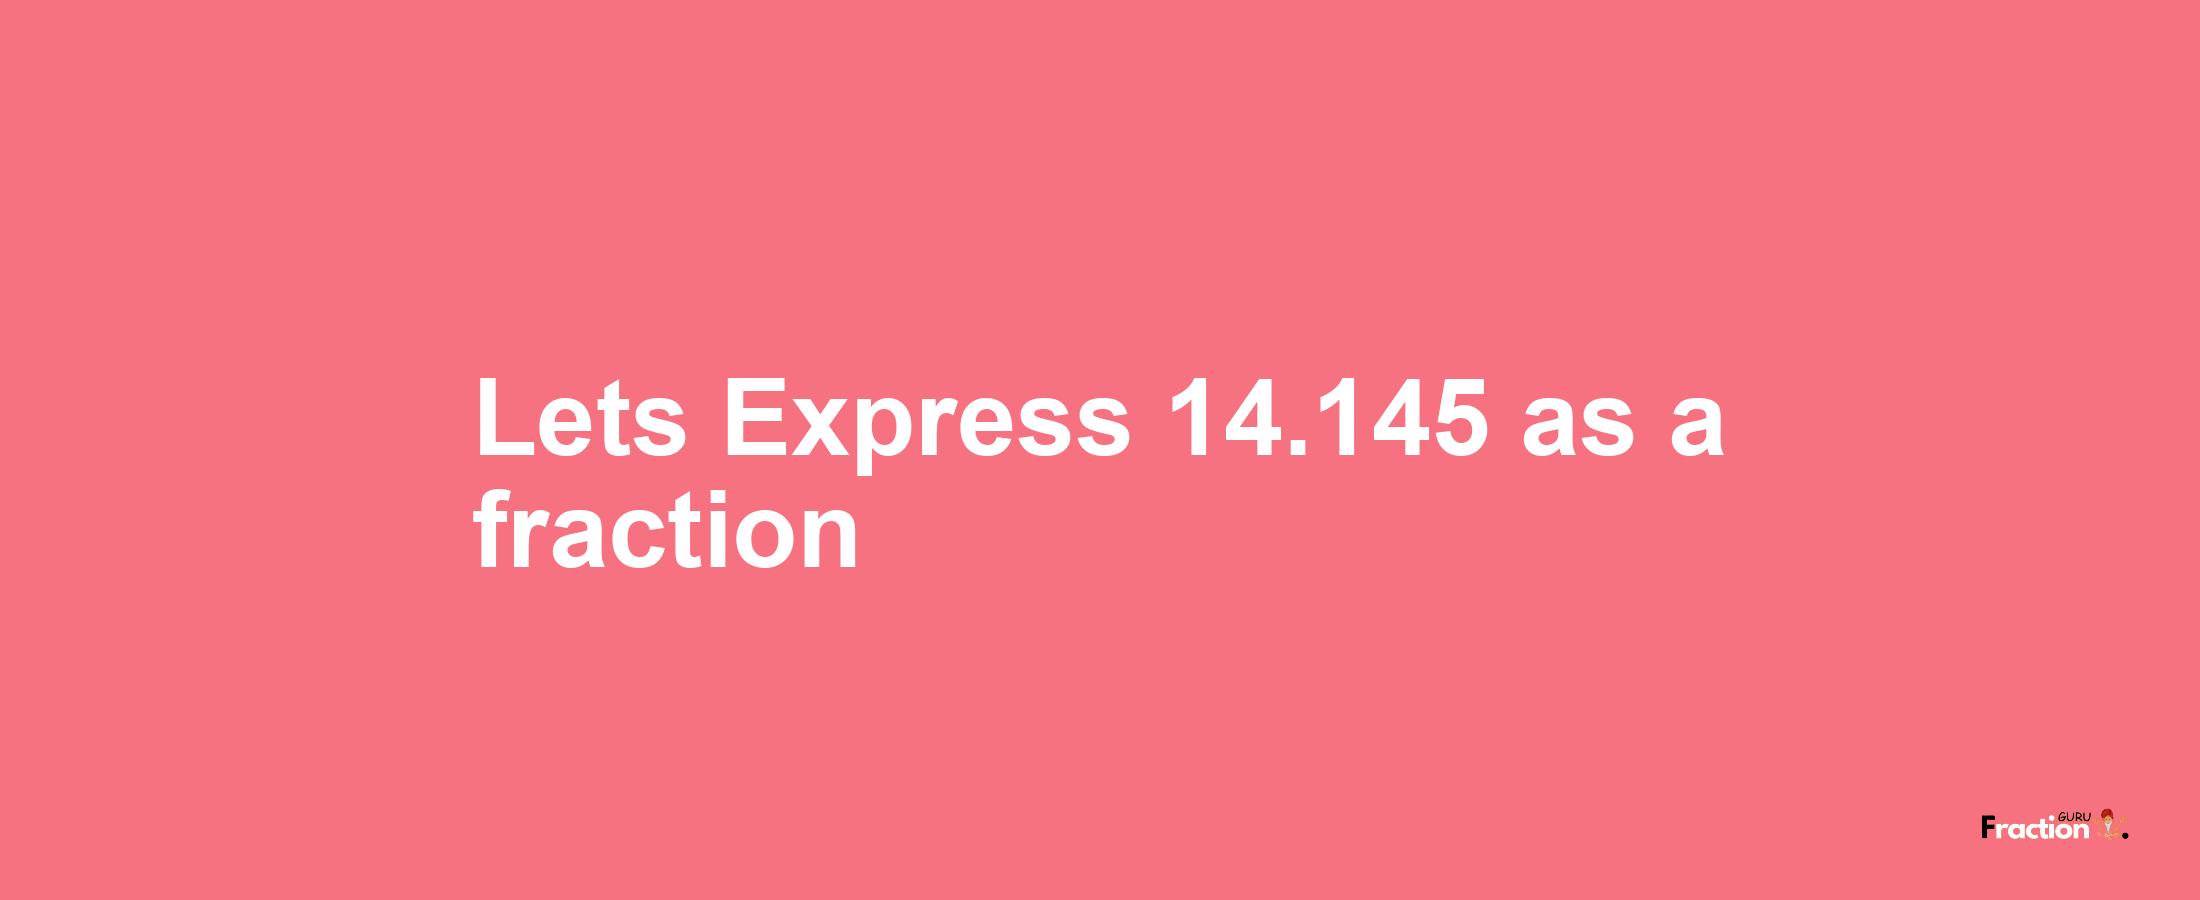 Lets Express 14.145 as afraction